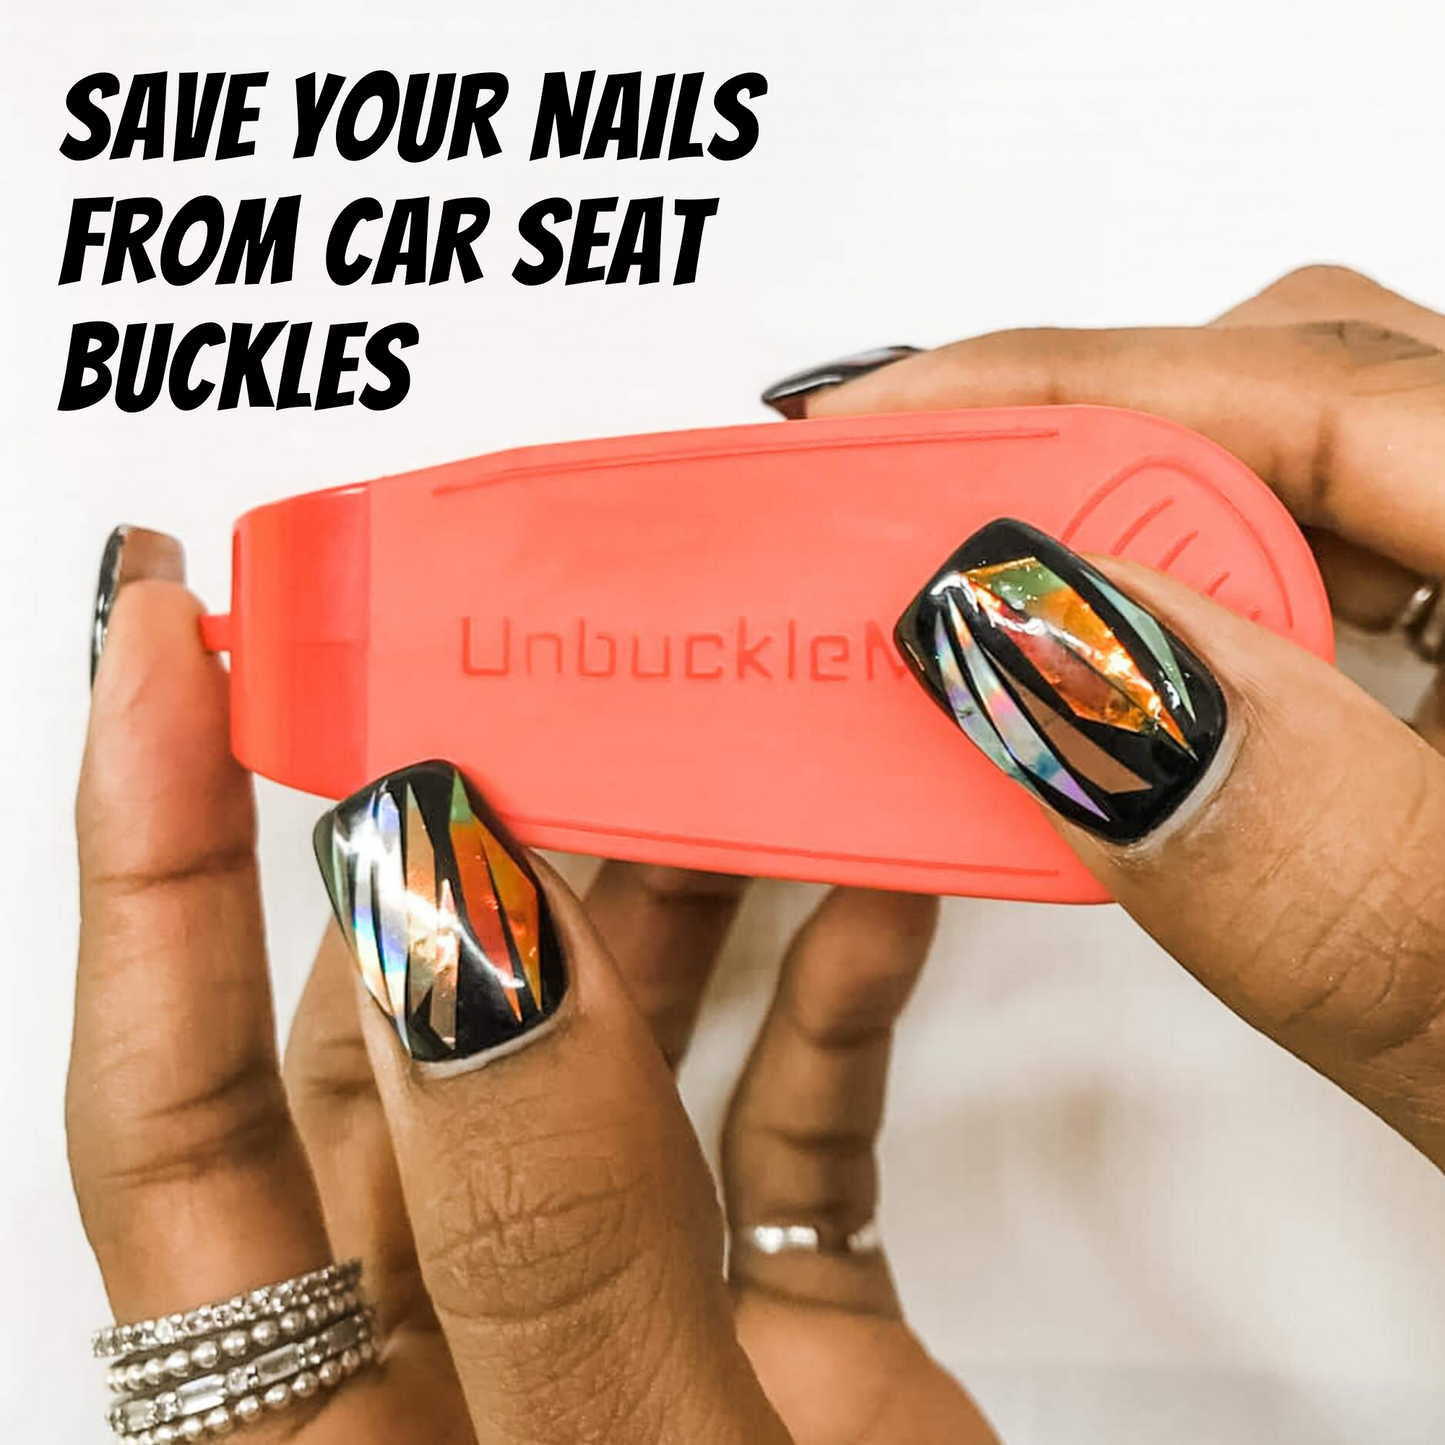 UnbuckleMe Car Seat Buckle Release Tool - Easy Opener Aid for Arthritis, Long Nails, Older Kids - Button Pusher for Infant, Toddler, Convertible 5 pt Harness Car Seats - As Seen on Shark Tank